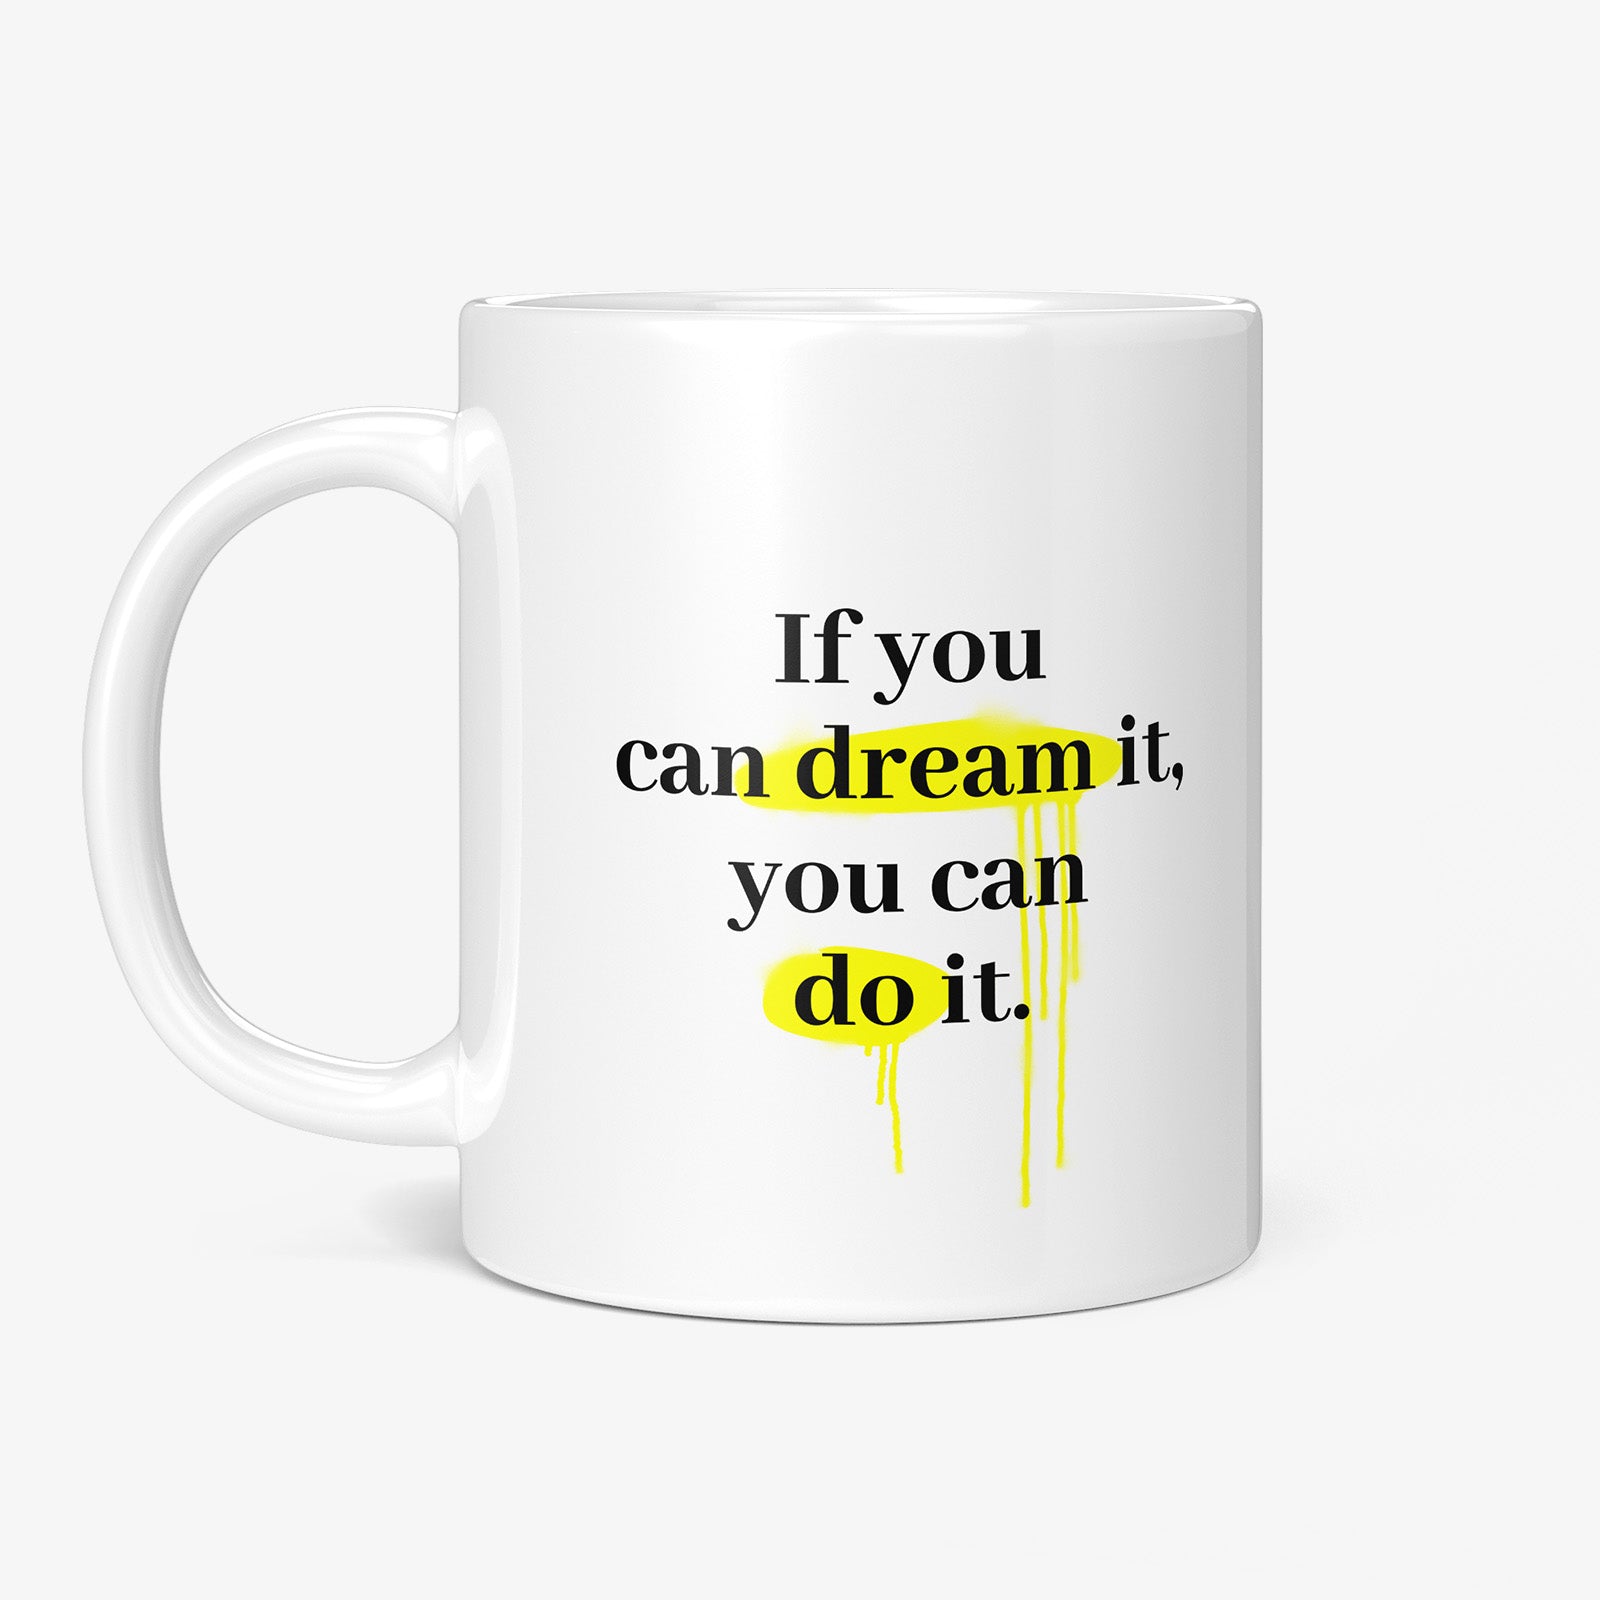 Be inspired by Walt Disney's famous quote, "If you can dream it, you can do it" on this white and glossy 11oz coffee mug with the handle on the left.